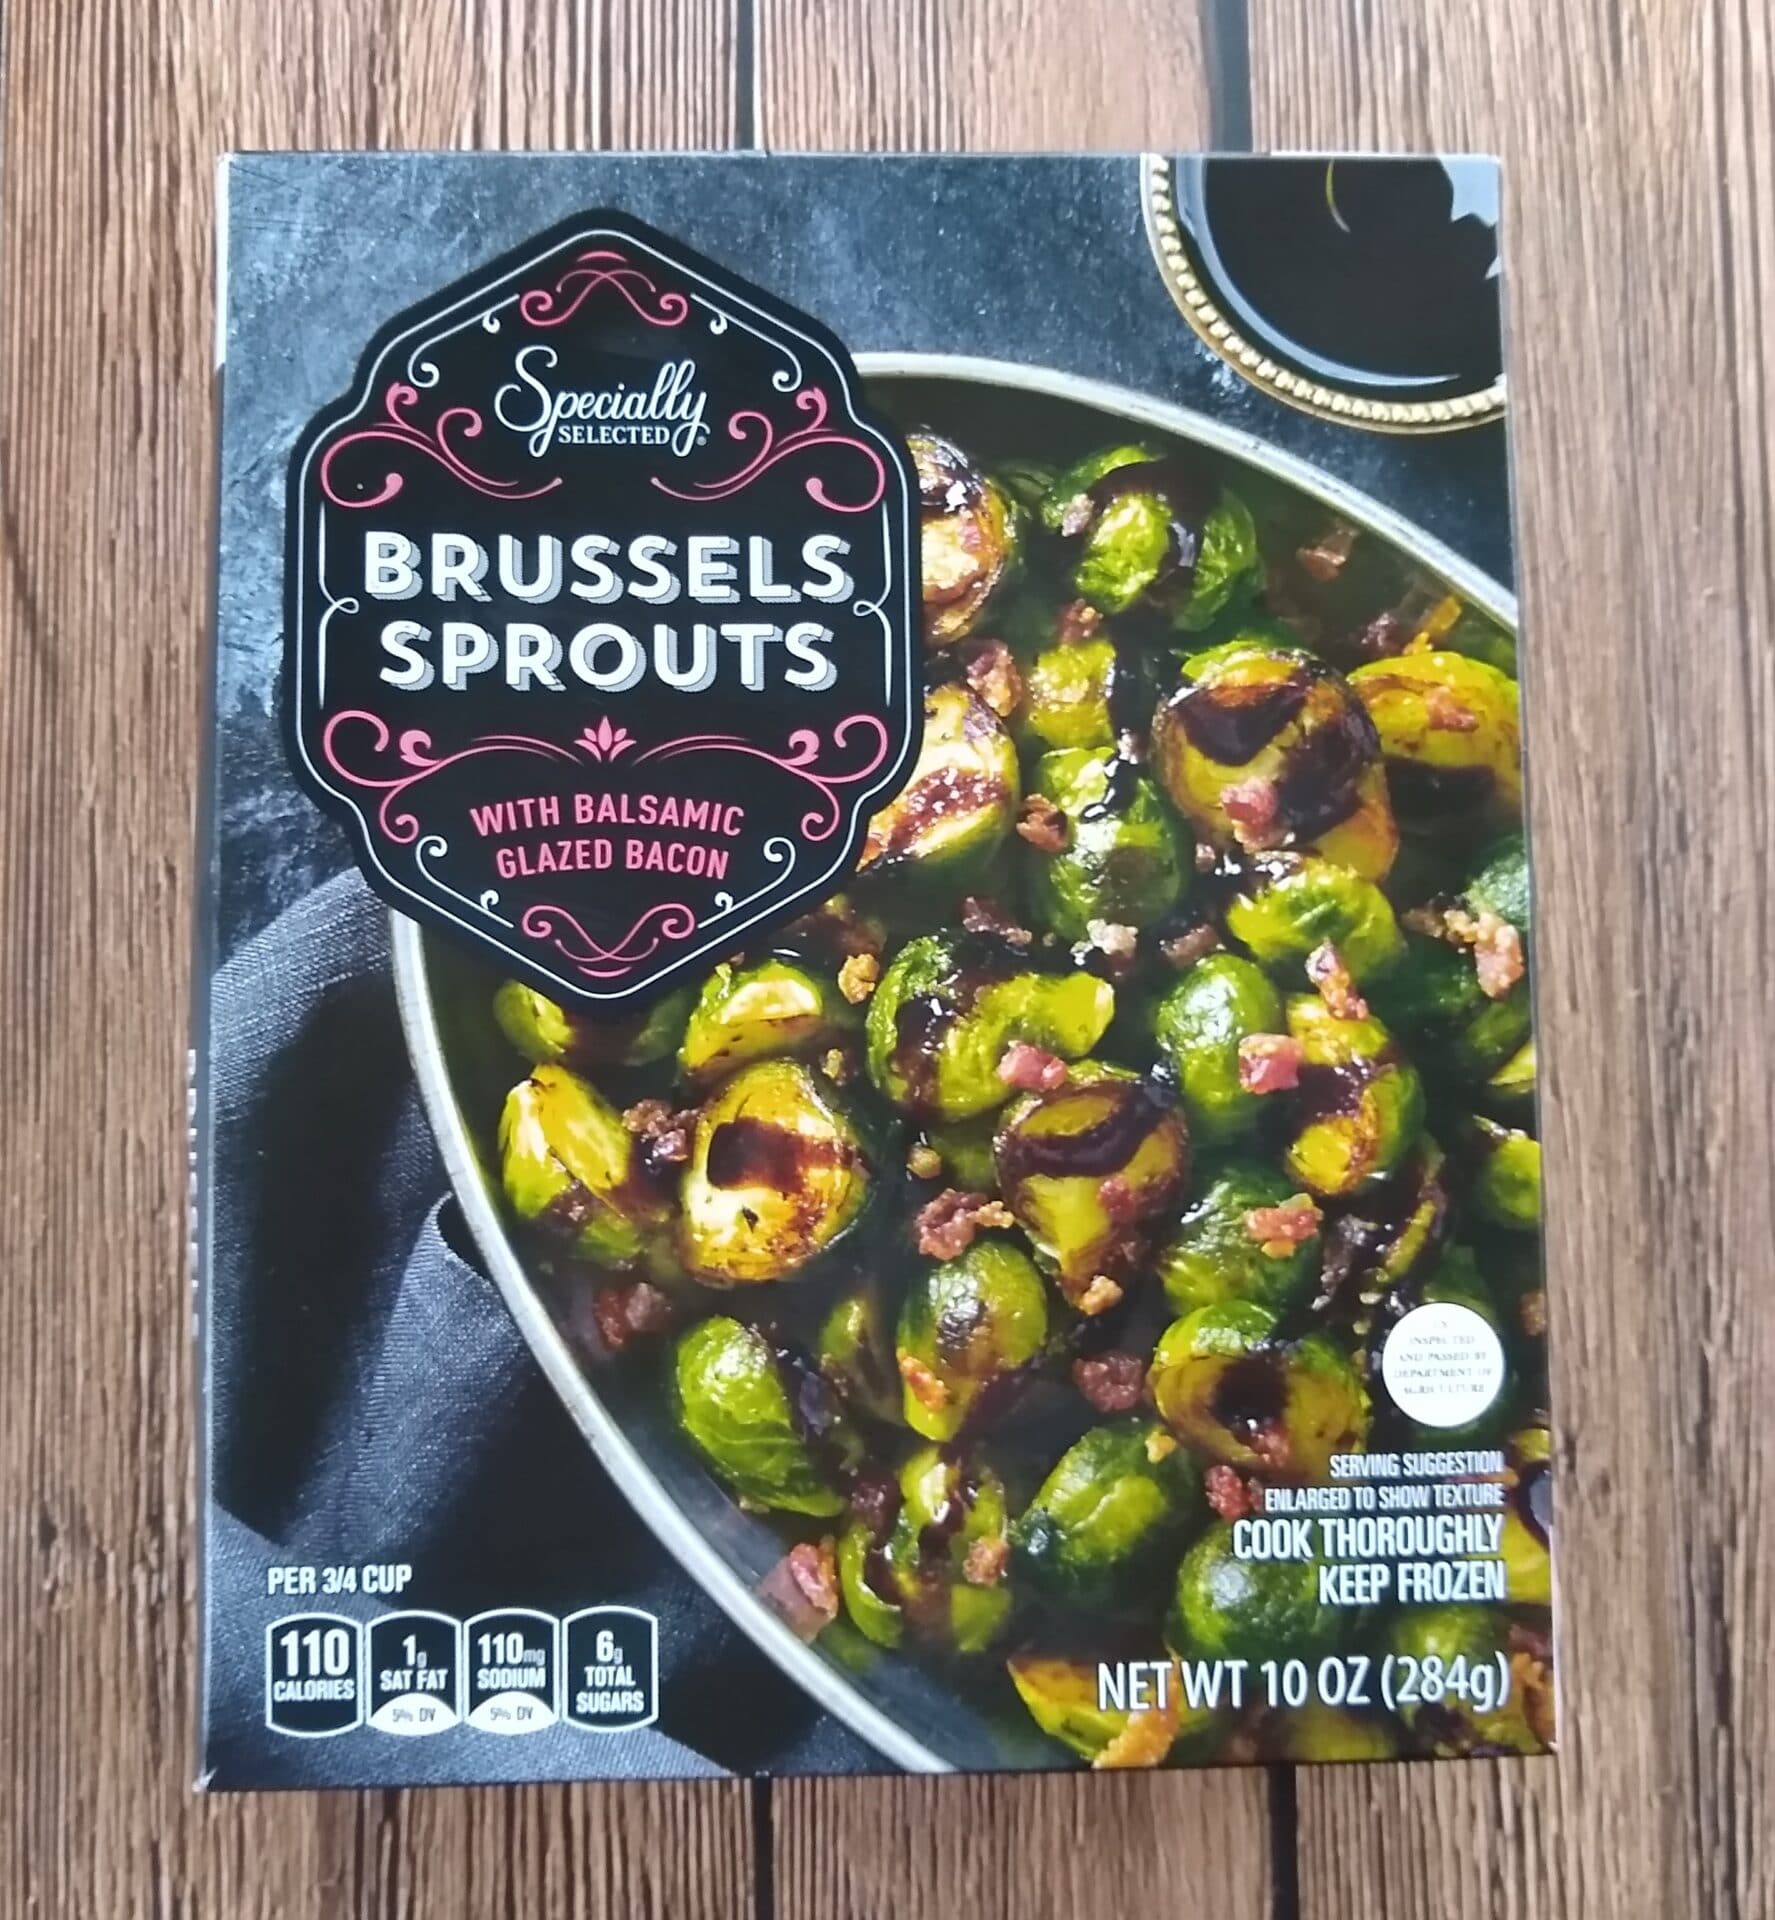 Specially Selected Brussels Sprouts with Balsamic Glazed Bacon